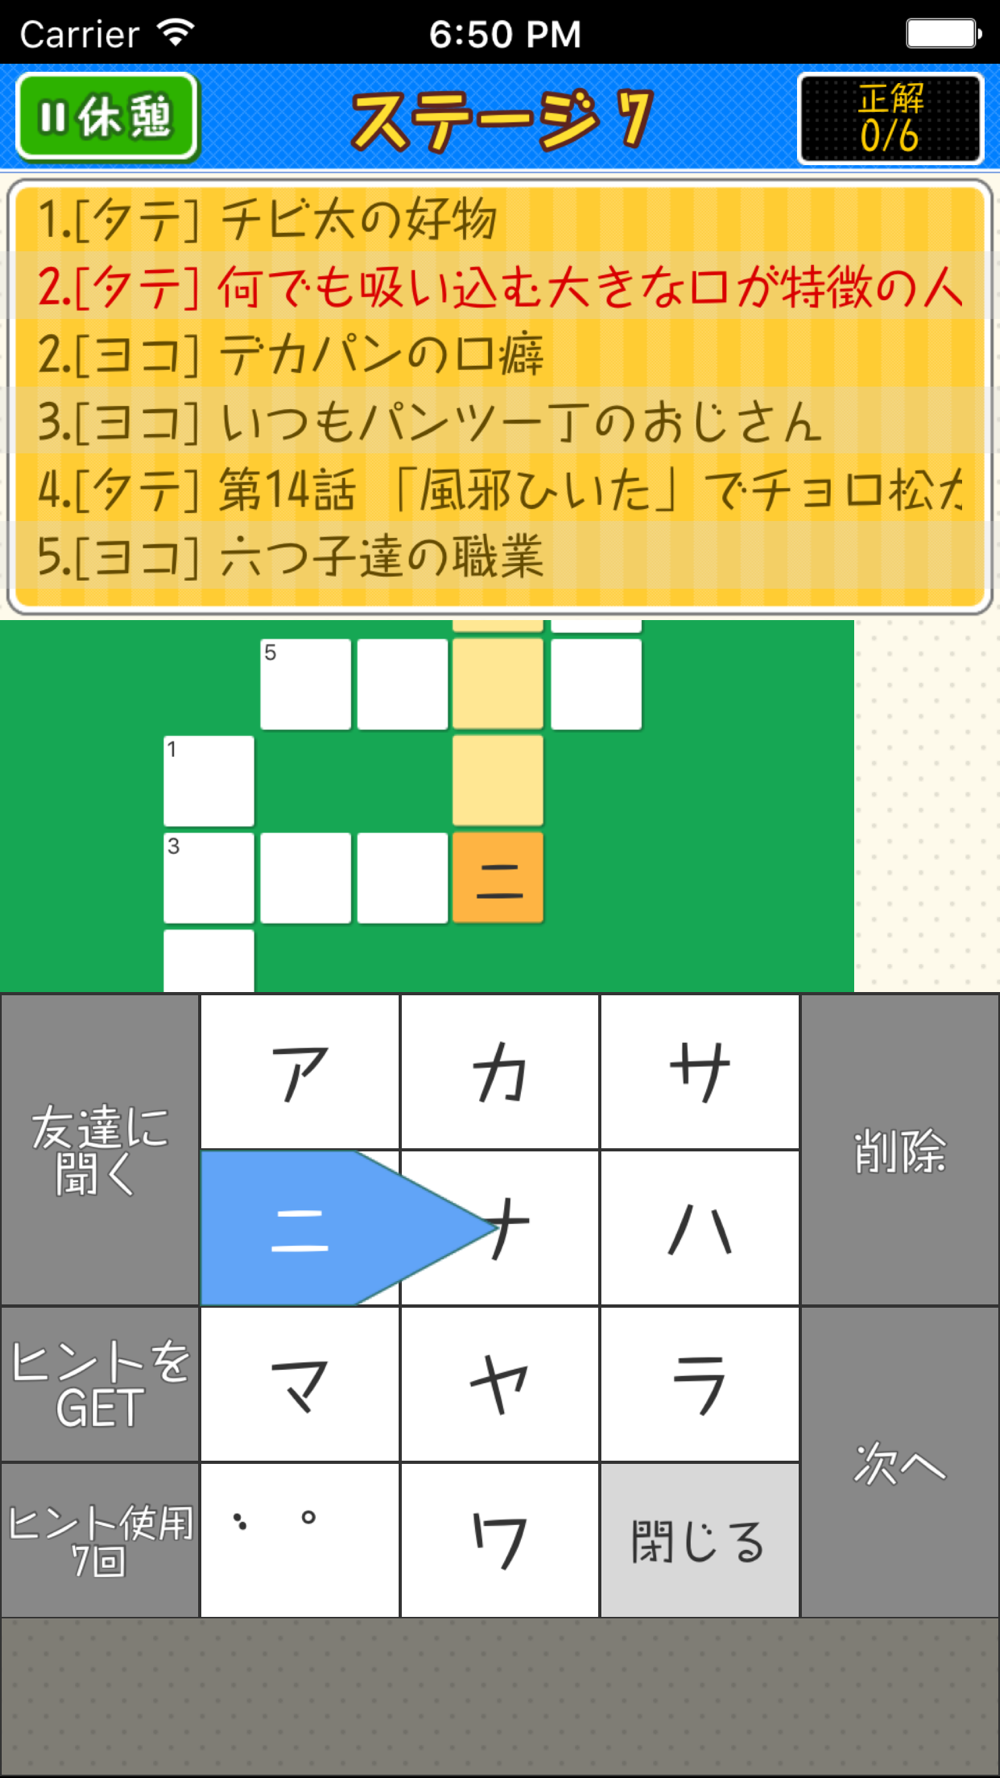 Crossword Puzzle For Osomatsu San Edition Free Download App For Iphone Steprimo Com